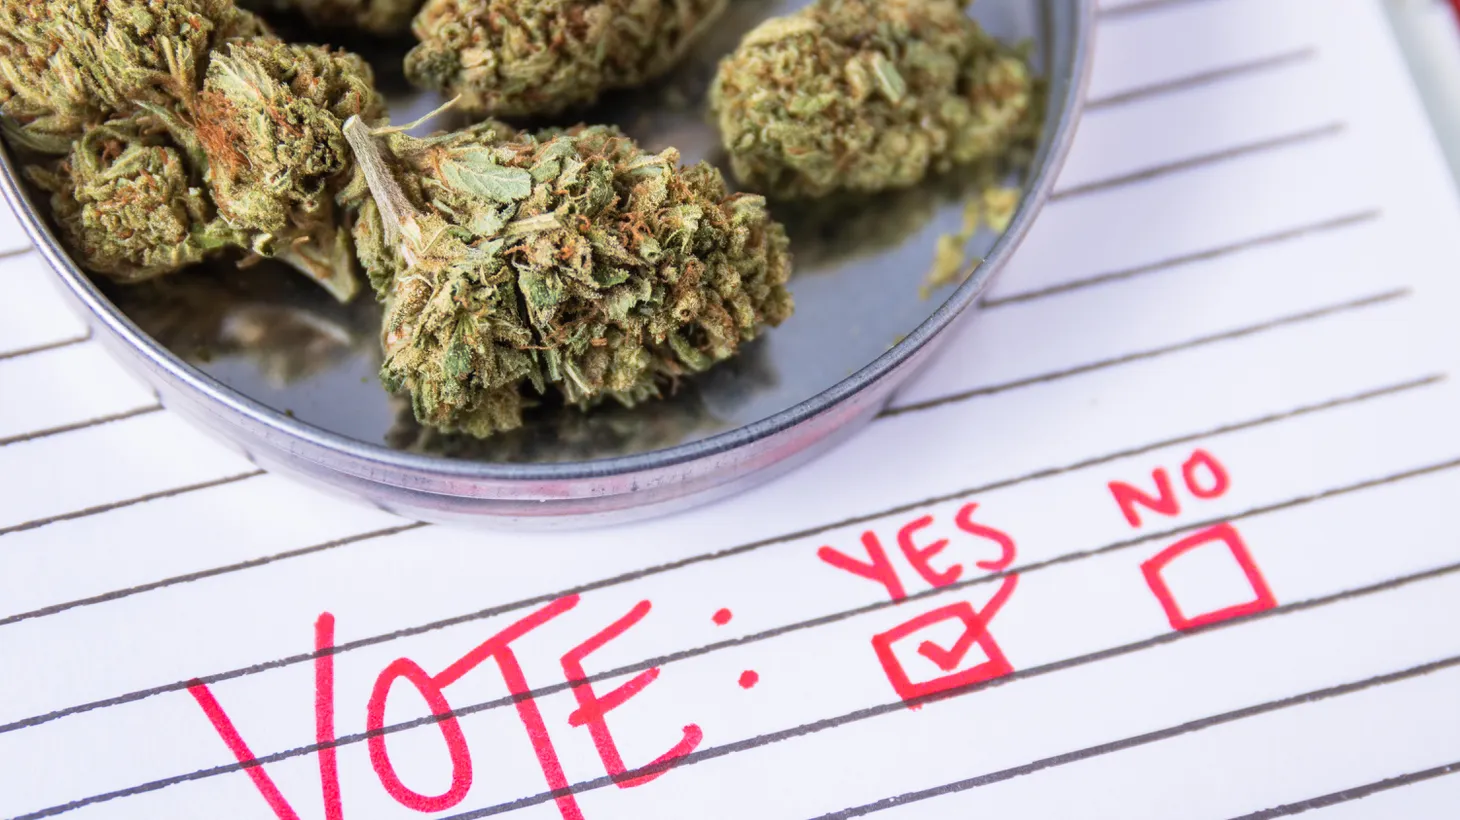 “No one’s winning in California on rolling back [cannabis] legalization,” says Leafly Senior Editor David Downs, who notes the marijuana industry is watching which candidates are vying to become a bigger ally.